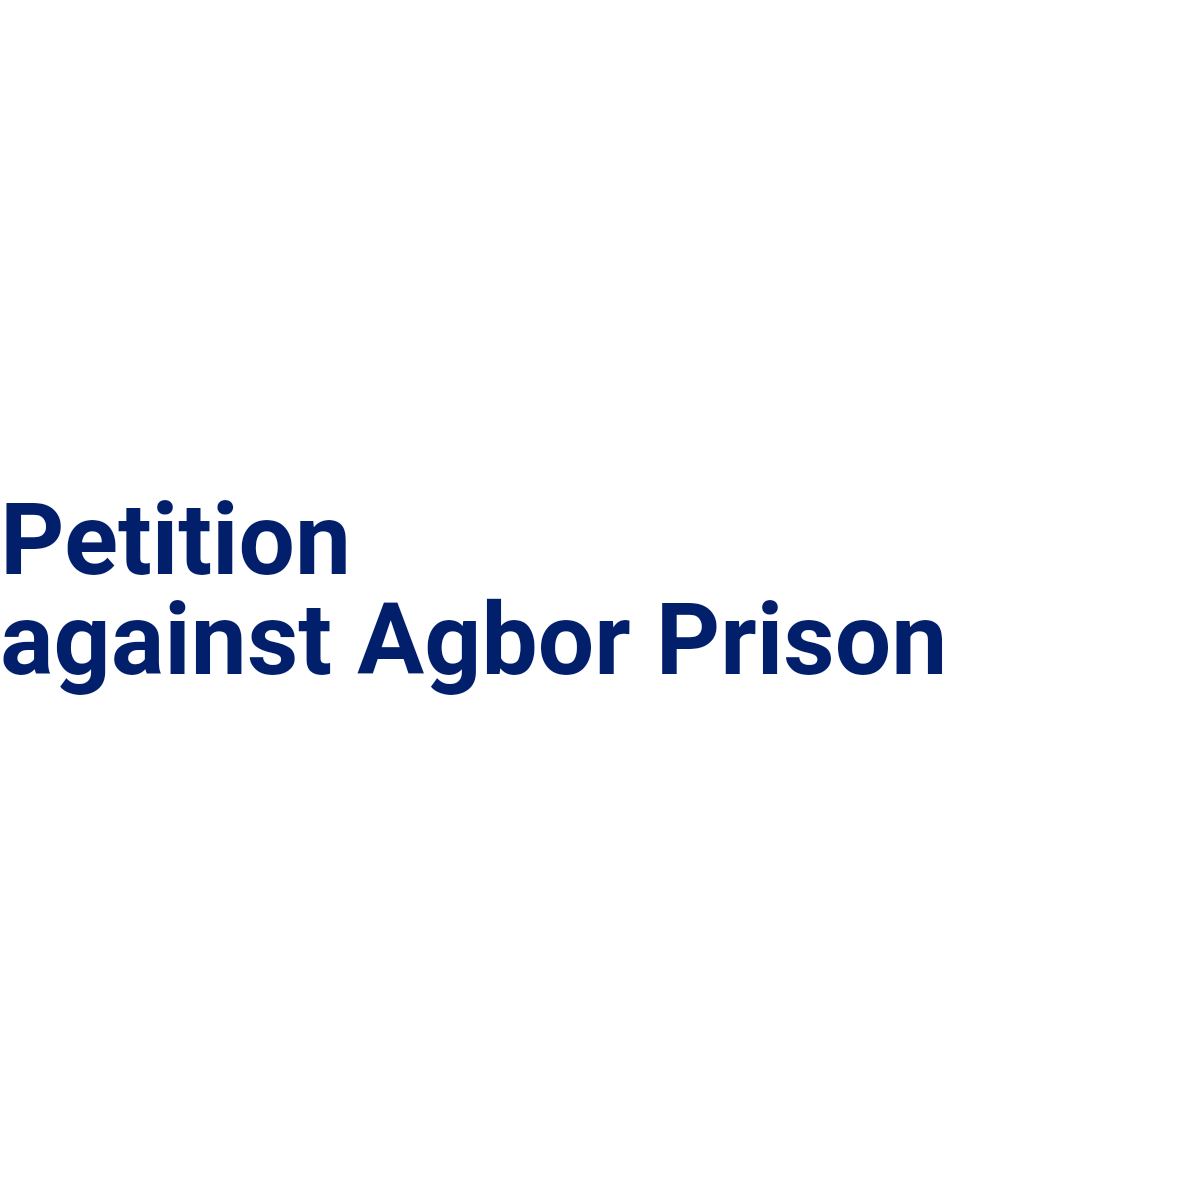 Petition against Agbor Prison